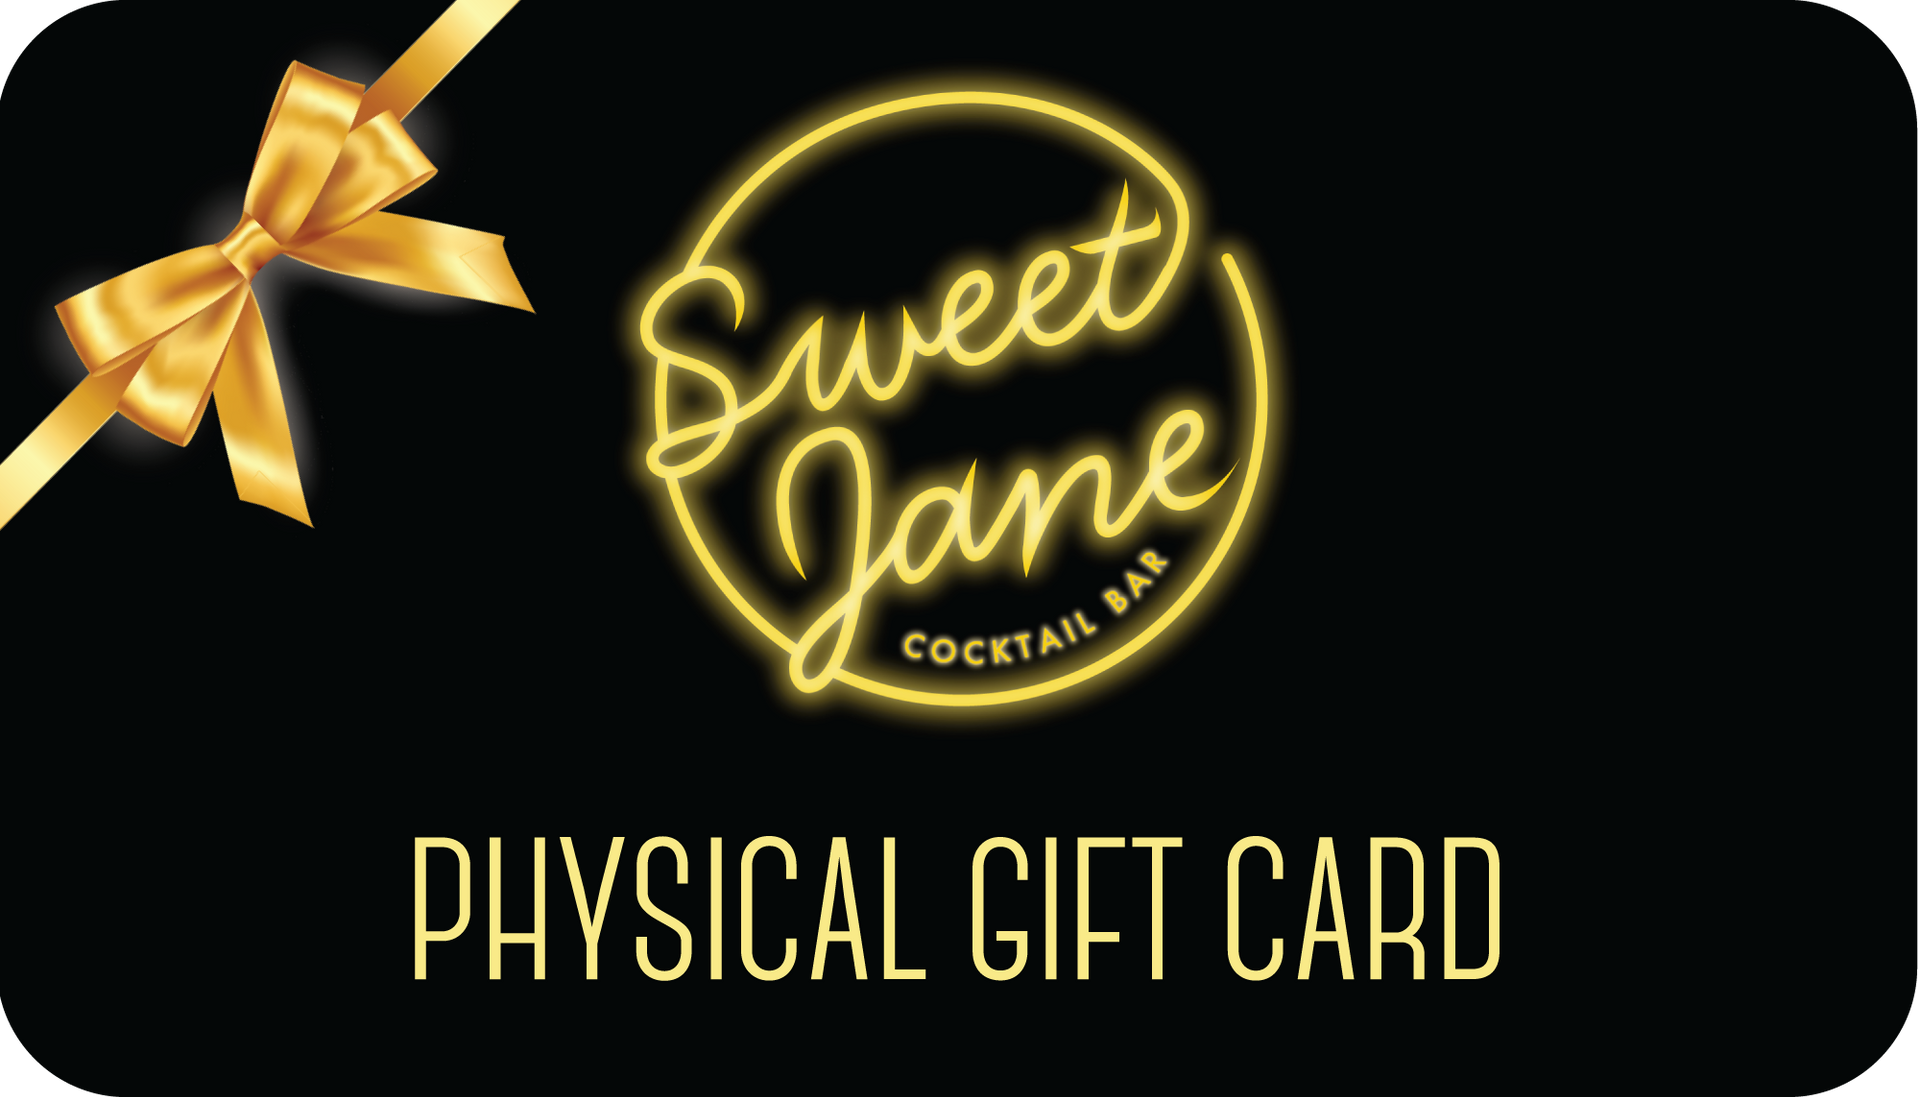 A physical gift card for sweet jane cocktail bar with a gold bow.